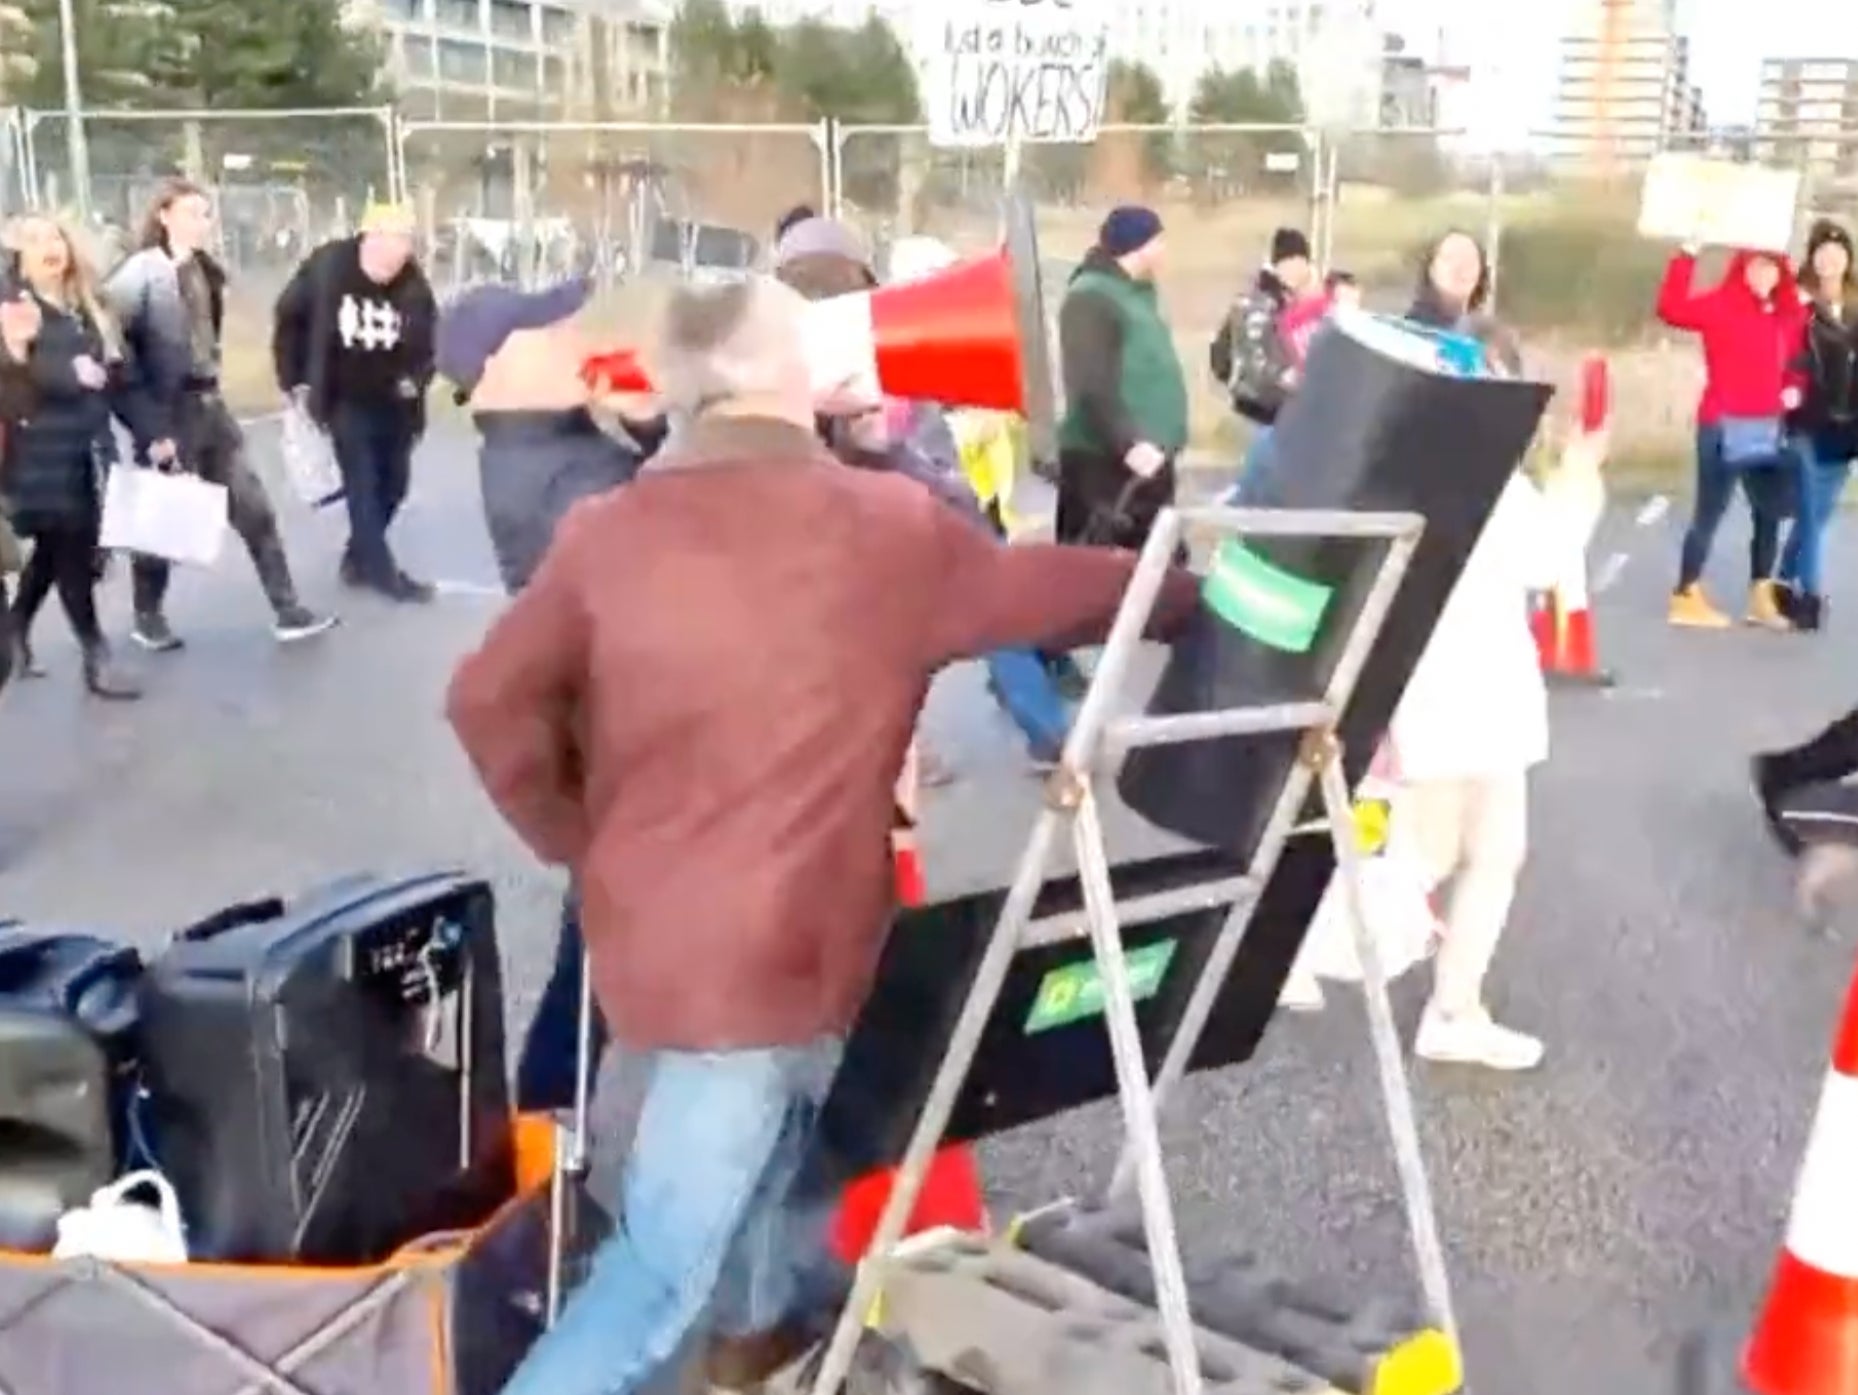 A protester knocking over a sign at a Milton Keynes testing site after hurling a cone